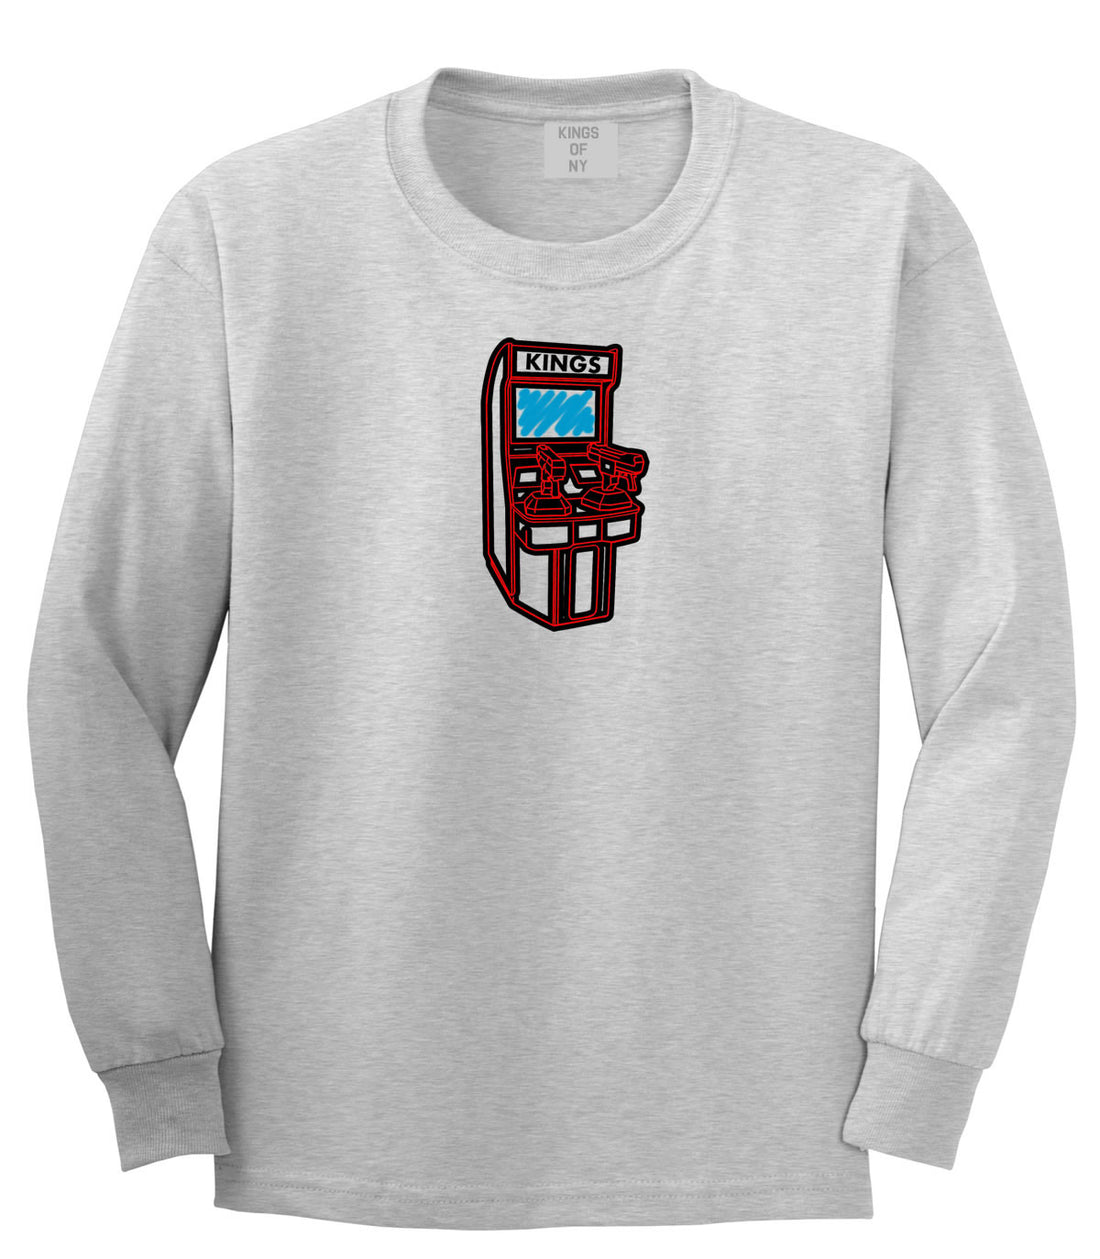 Arcade Game Gamer Long Sleeve T-Shirt in Grey By Kings Of NY